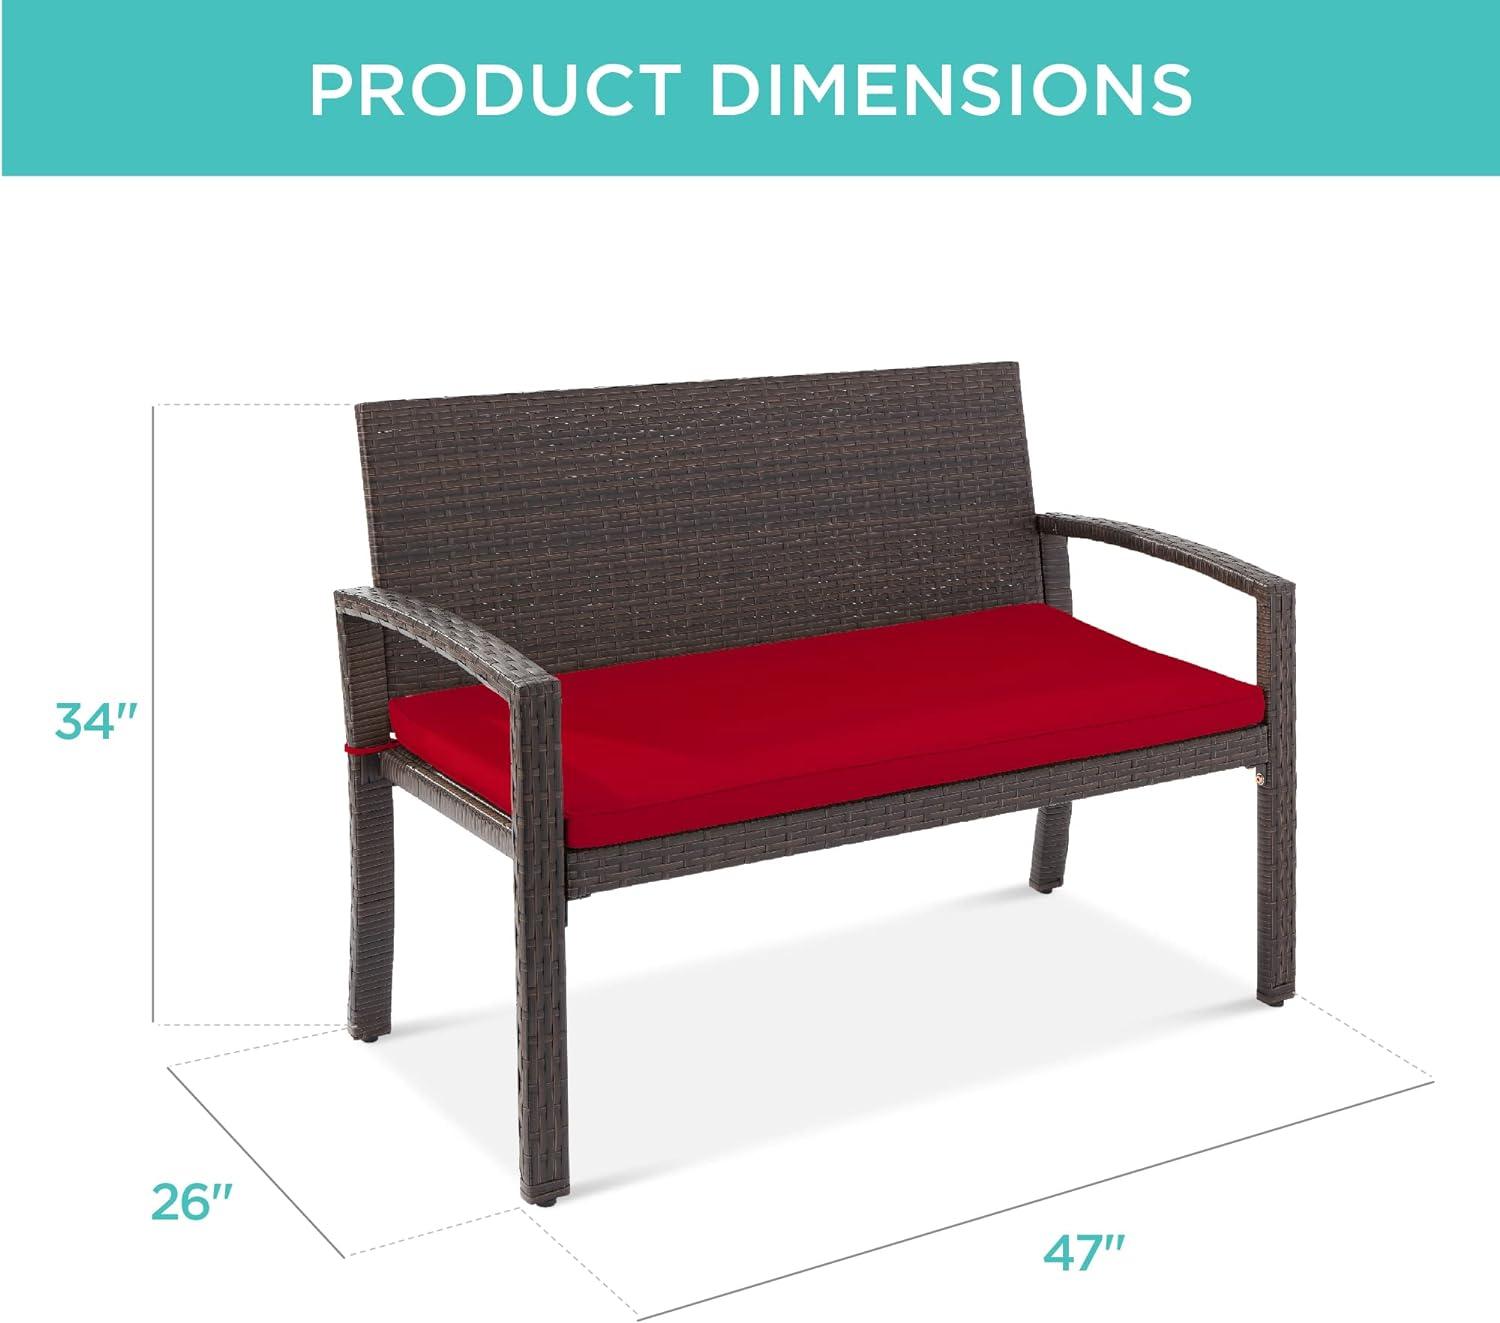 Cozy Haven 2-Person Brown Wicker Outdoor Bench with Red Cushion